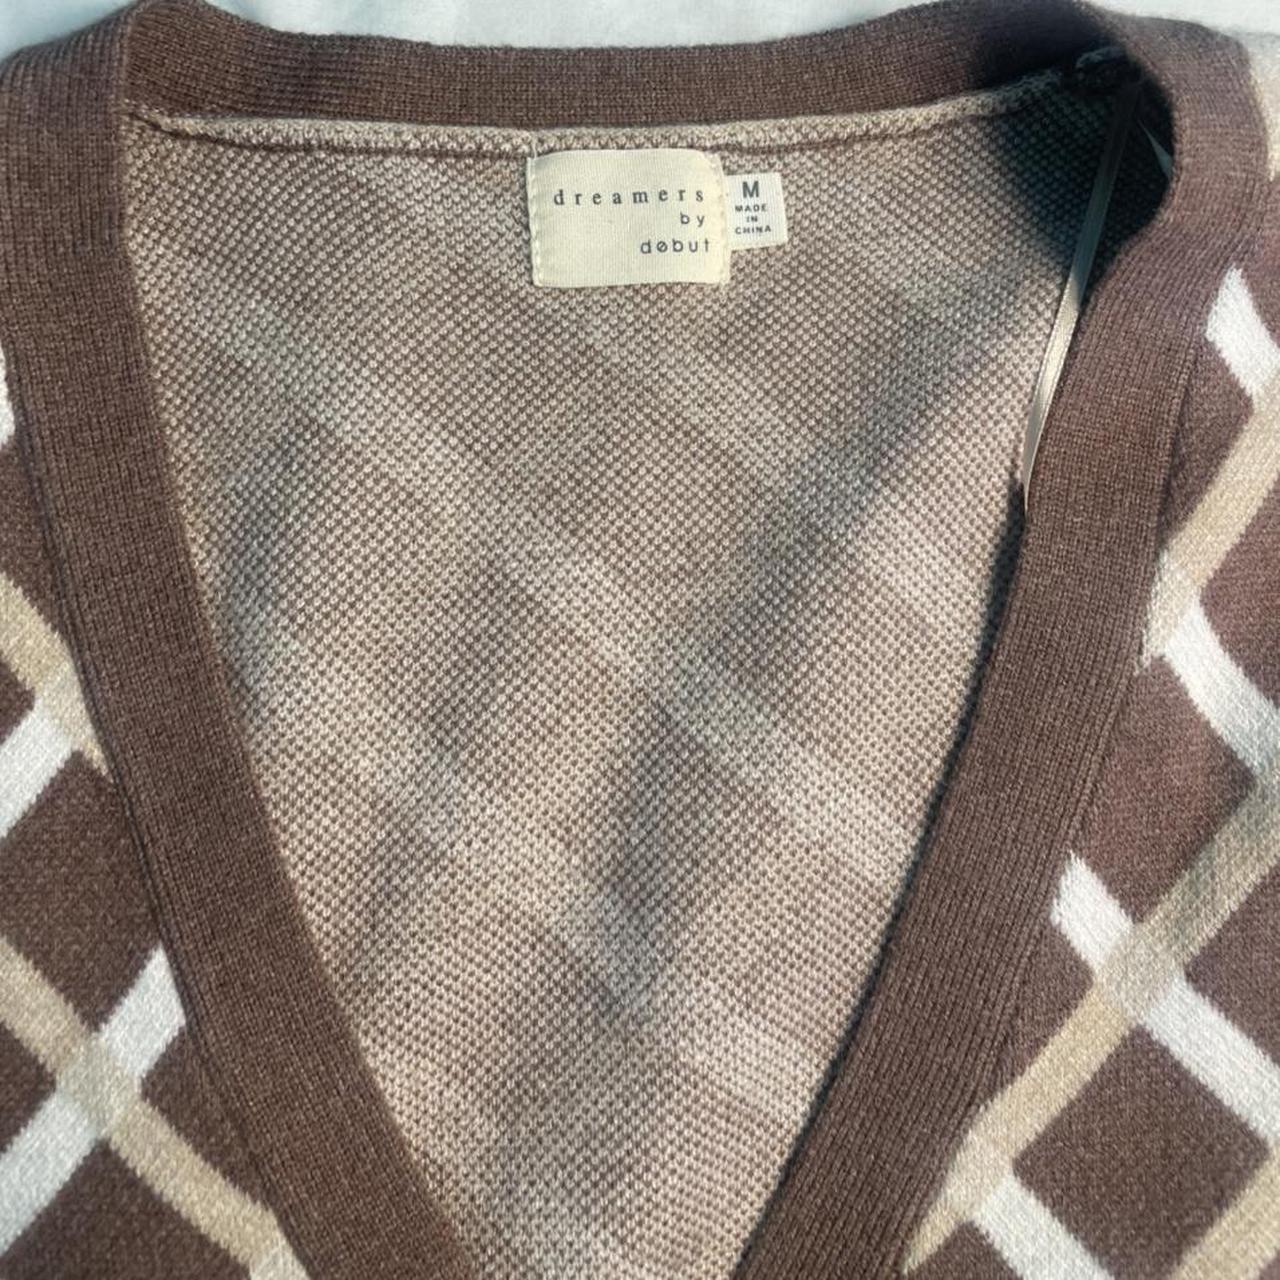 Product Image 3 - Super cute cardigan!
Brown with the